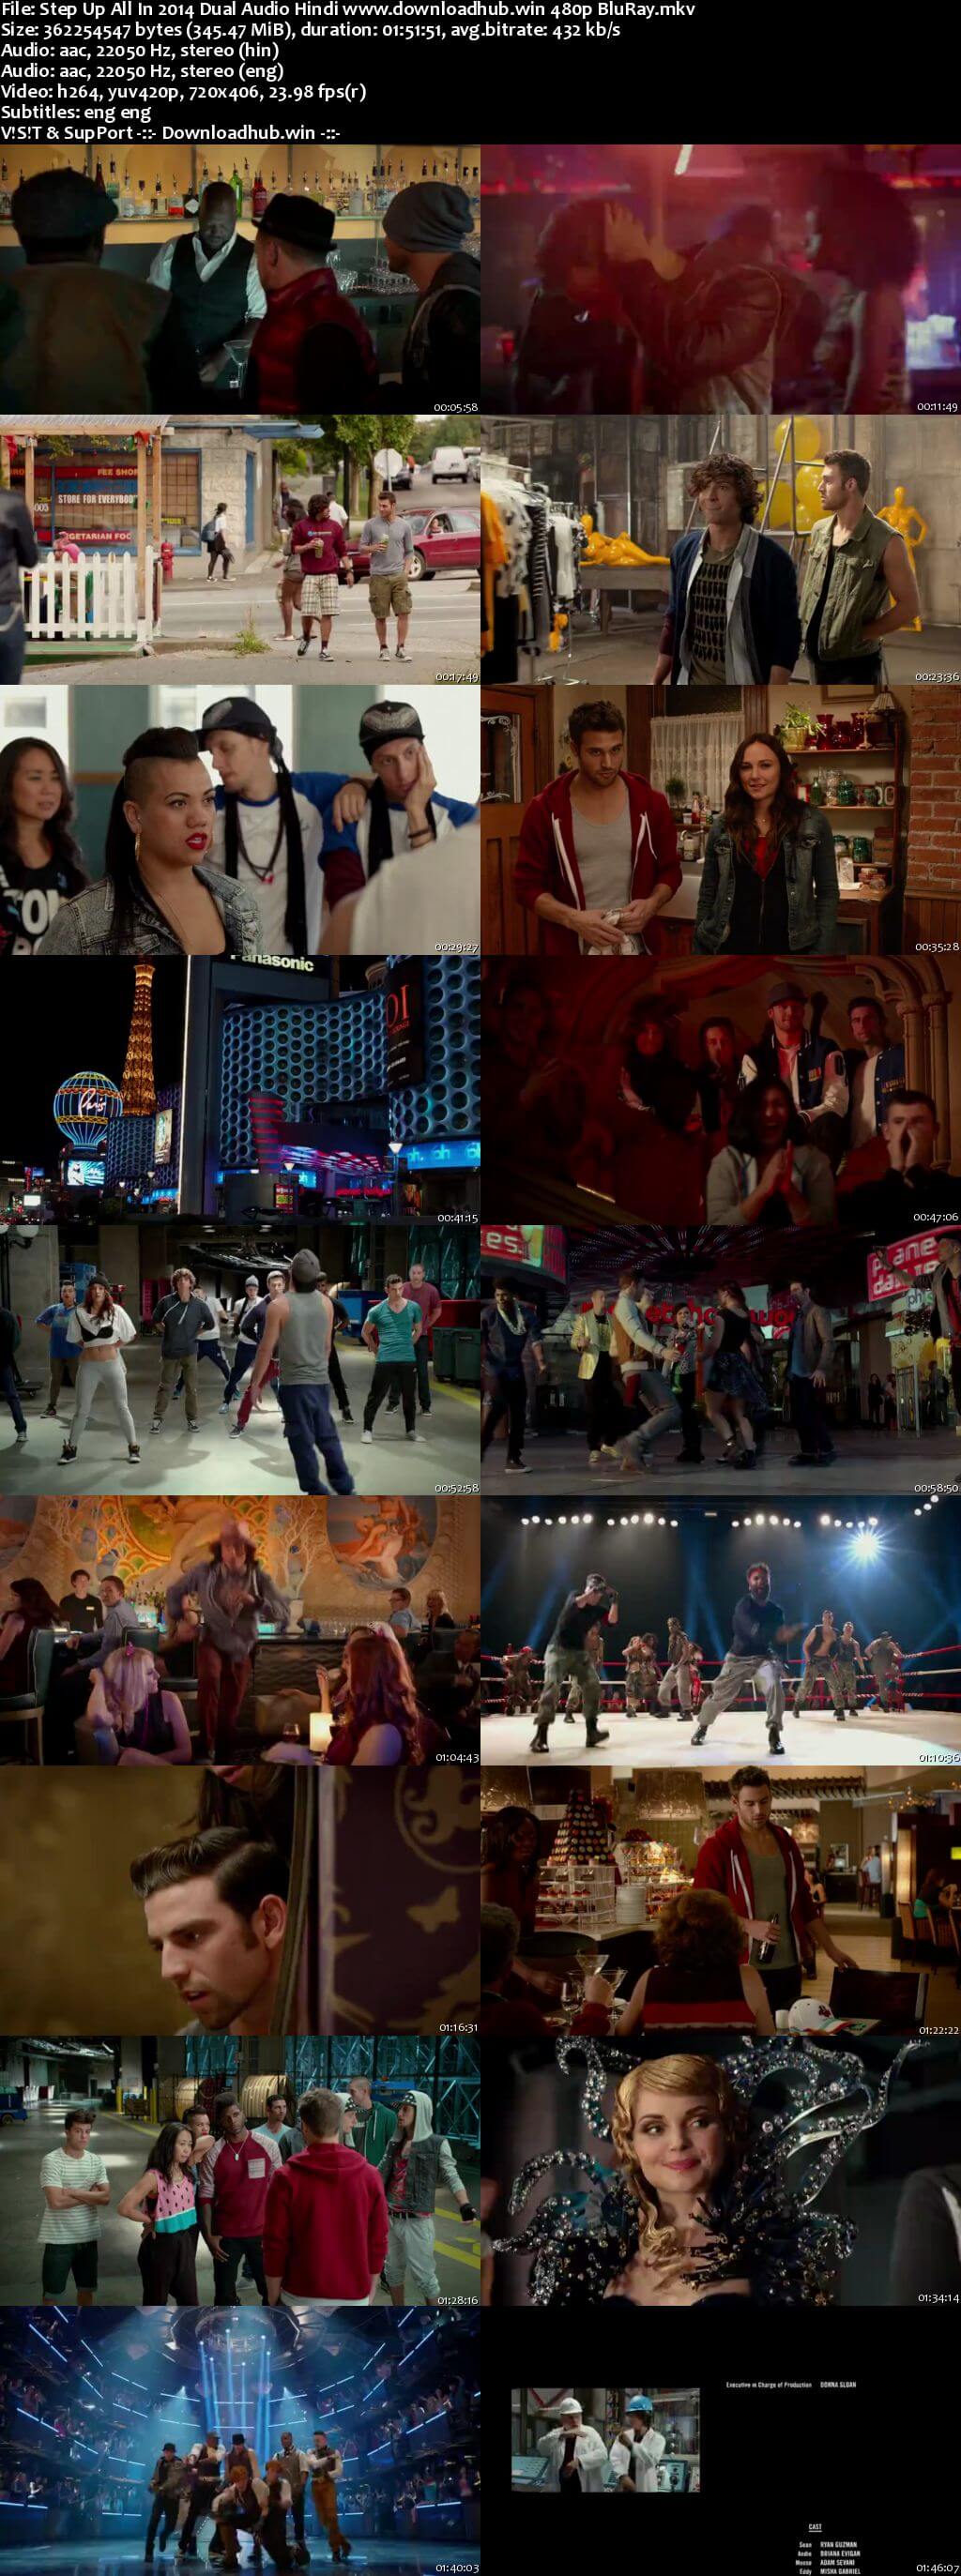 Step Up All In 2014 Hindi Dual Audio 350MB BluRay 480p ESubs